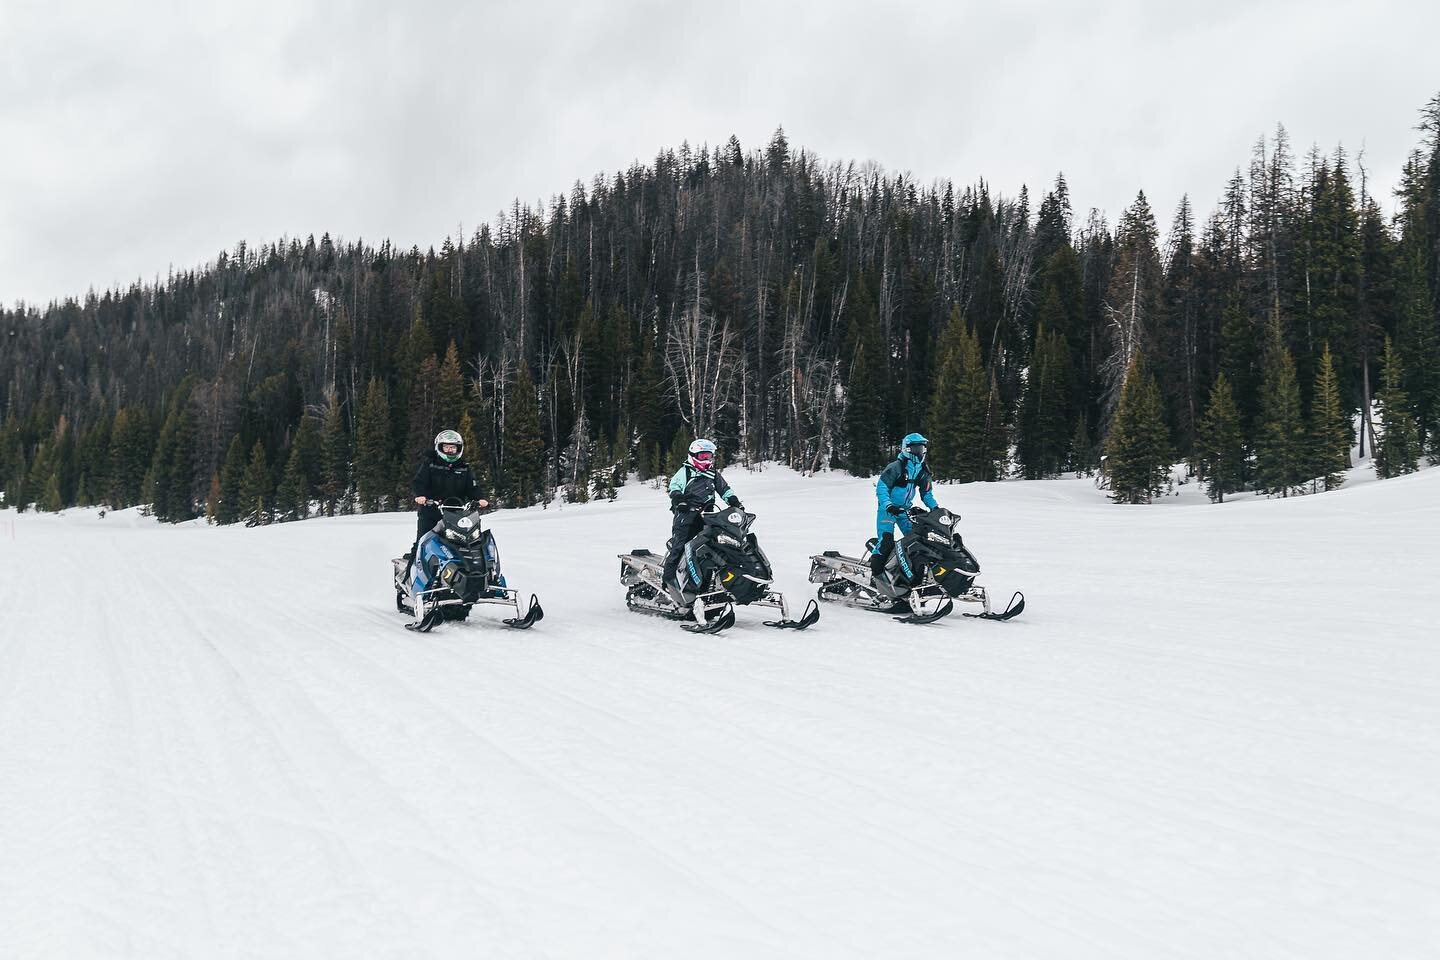 Adventure is always better when shared @ridewild.co

Daydreaming about our next snow season with our Ride Wild tribe. Togwotee Snow Retreat is already up on the site, everyone is welcome to join, come ride with us! 

📷 @joshipps x @ridewild.co @pola